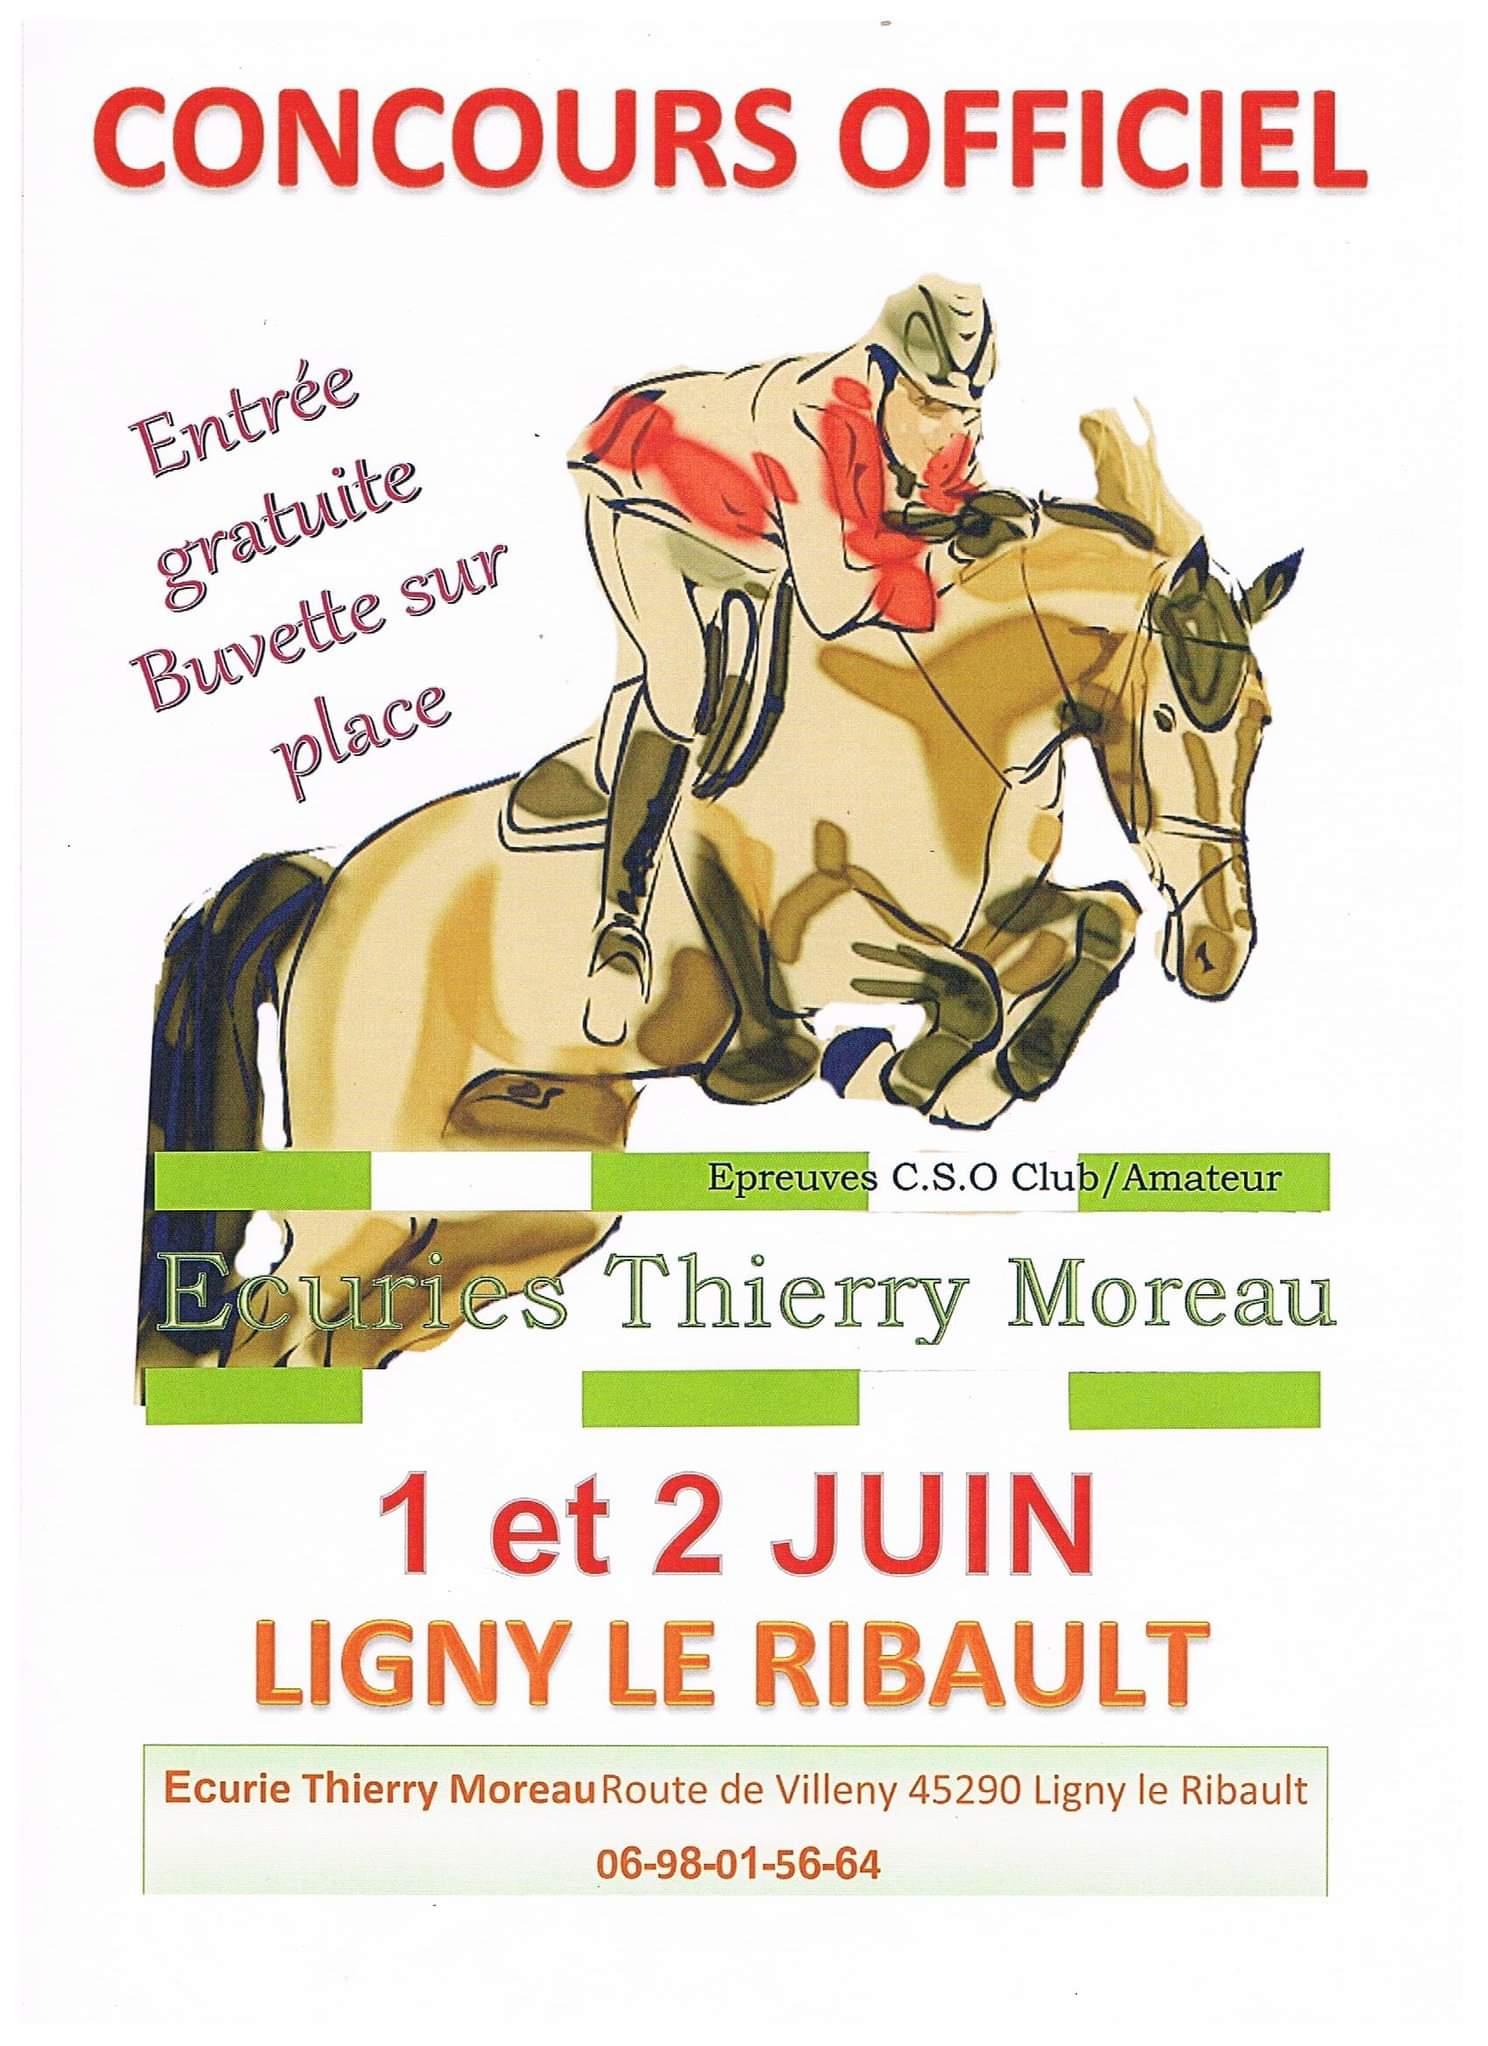 Concours 02 06 2019